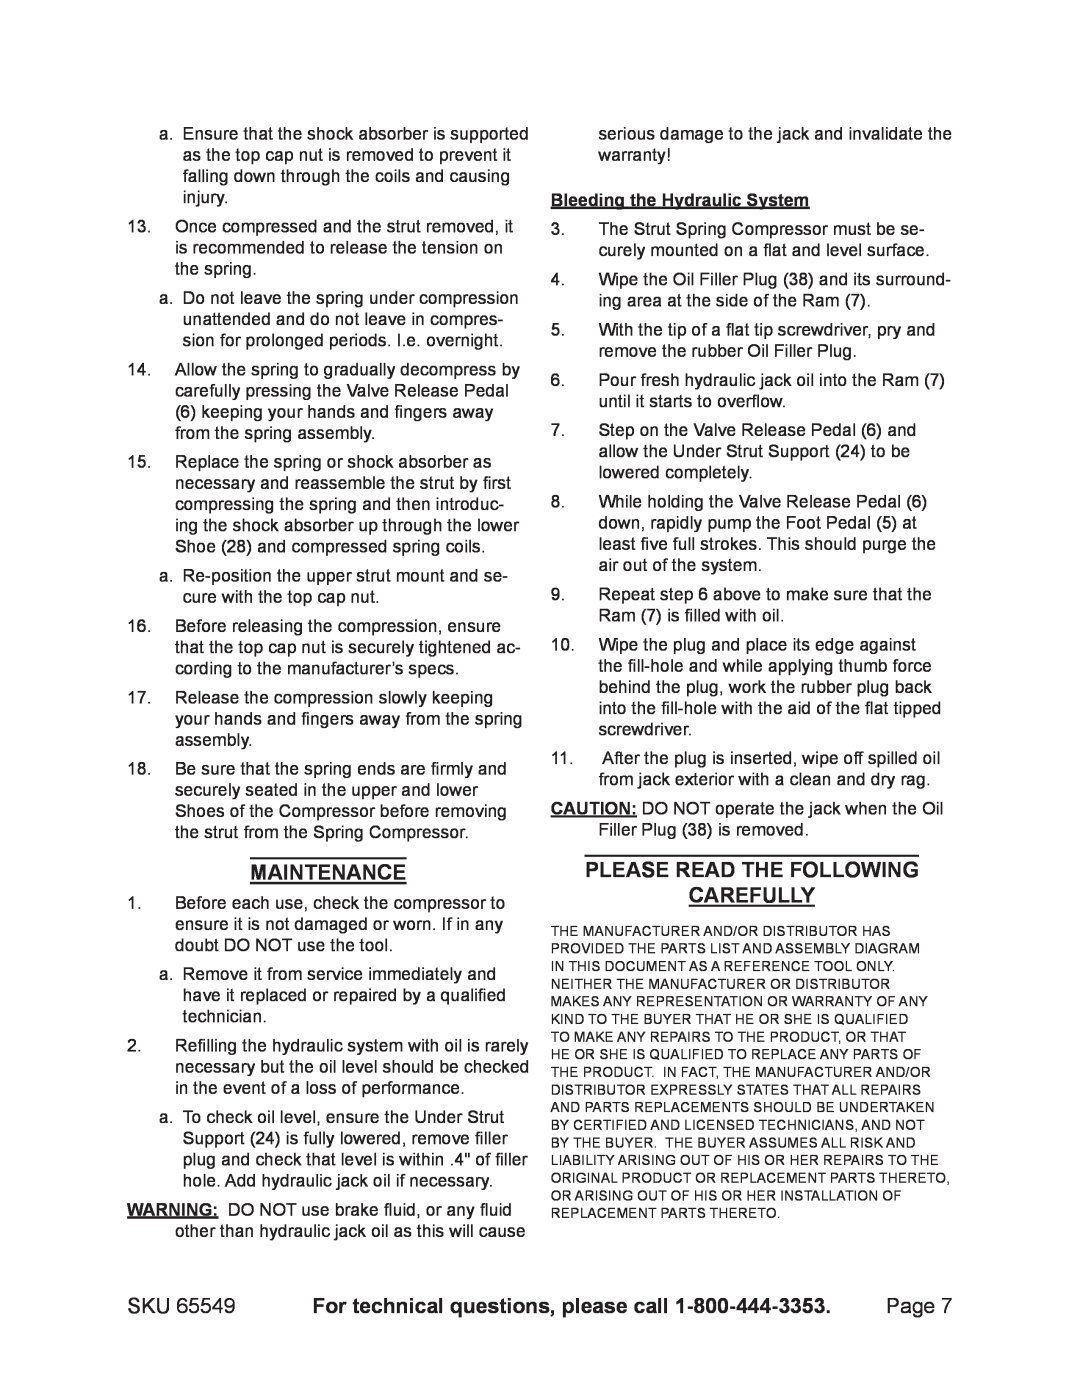 Harbor Freight Tools 65549 manual Page, Bleeding the Hydraulic System 